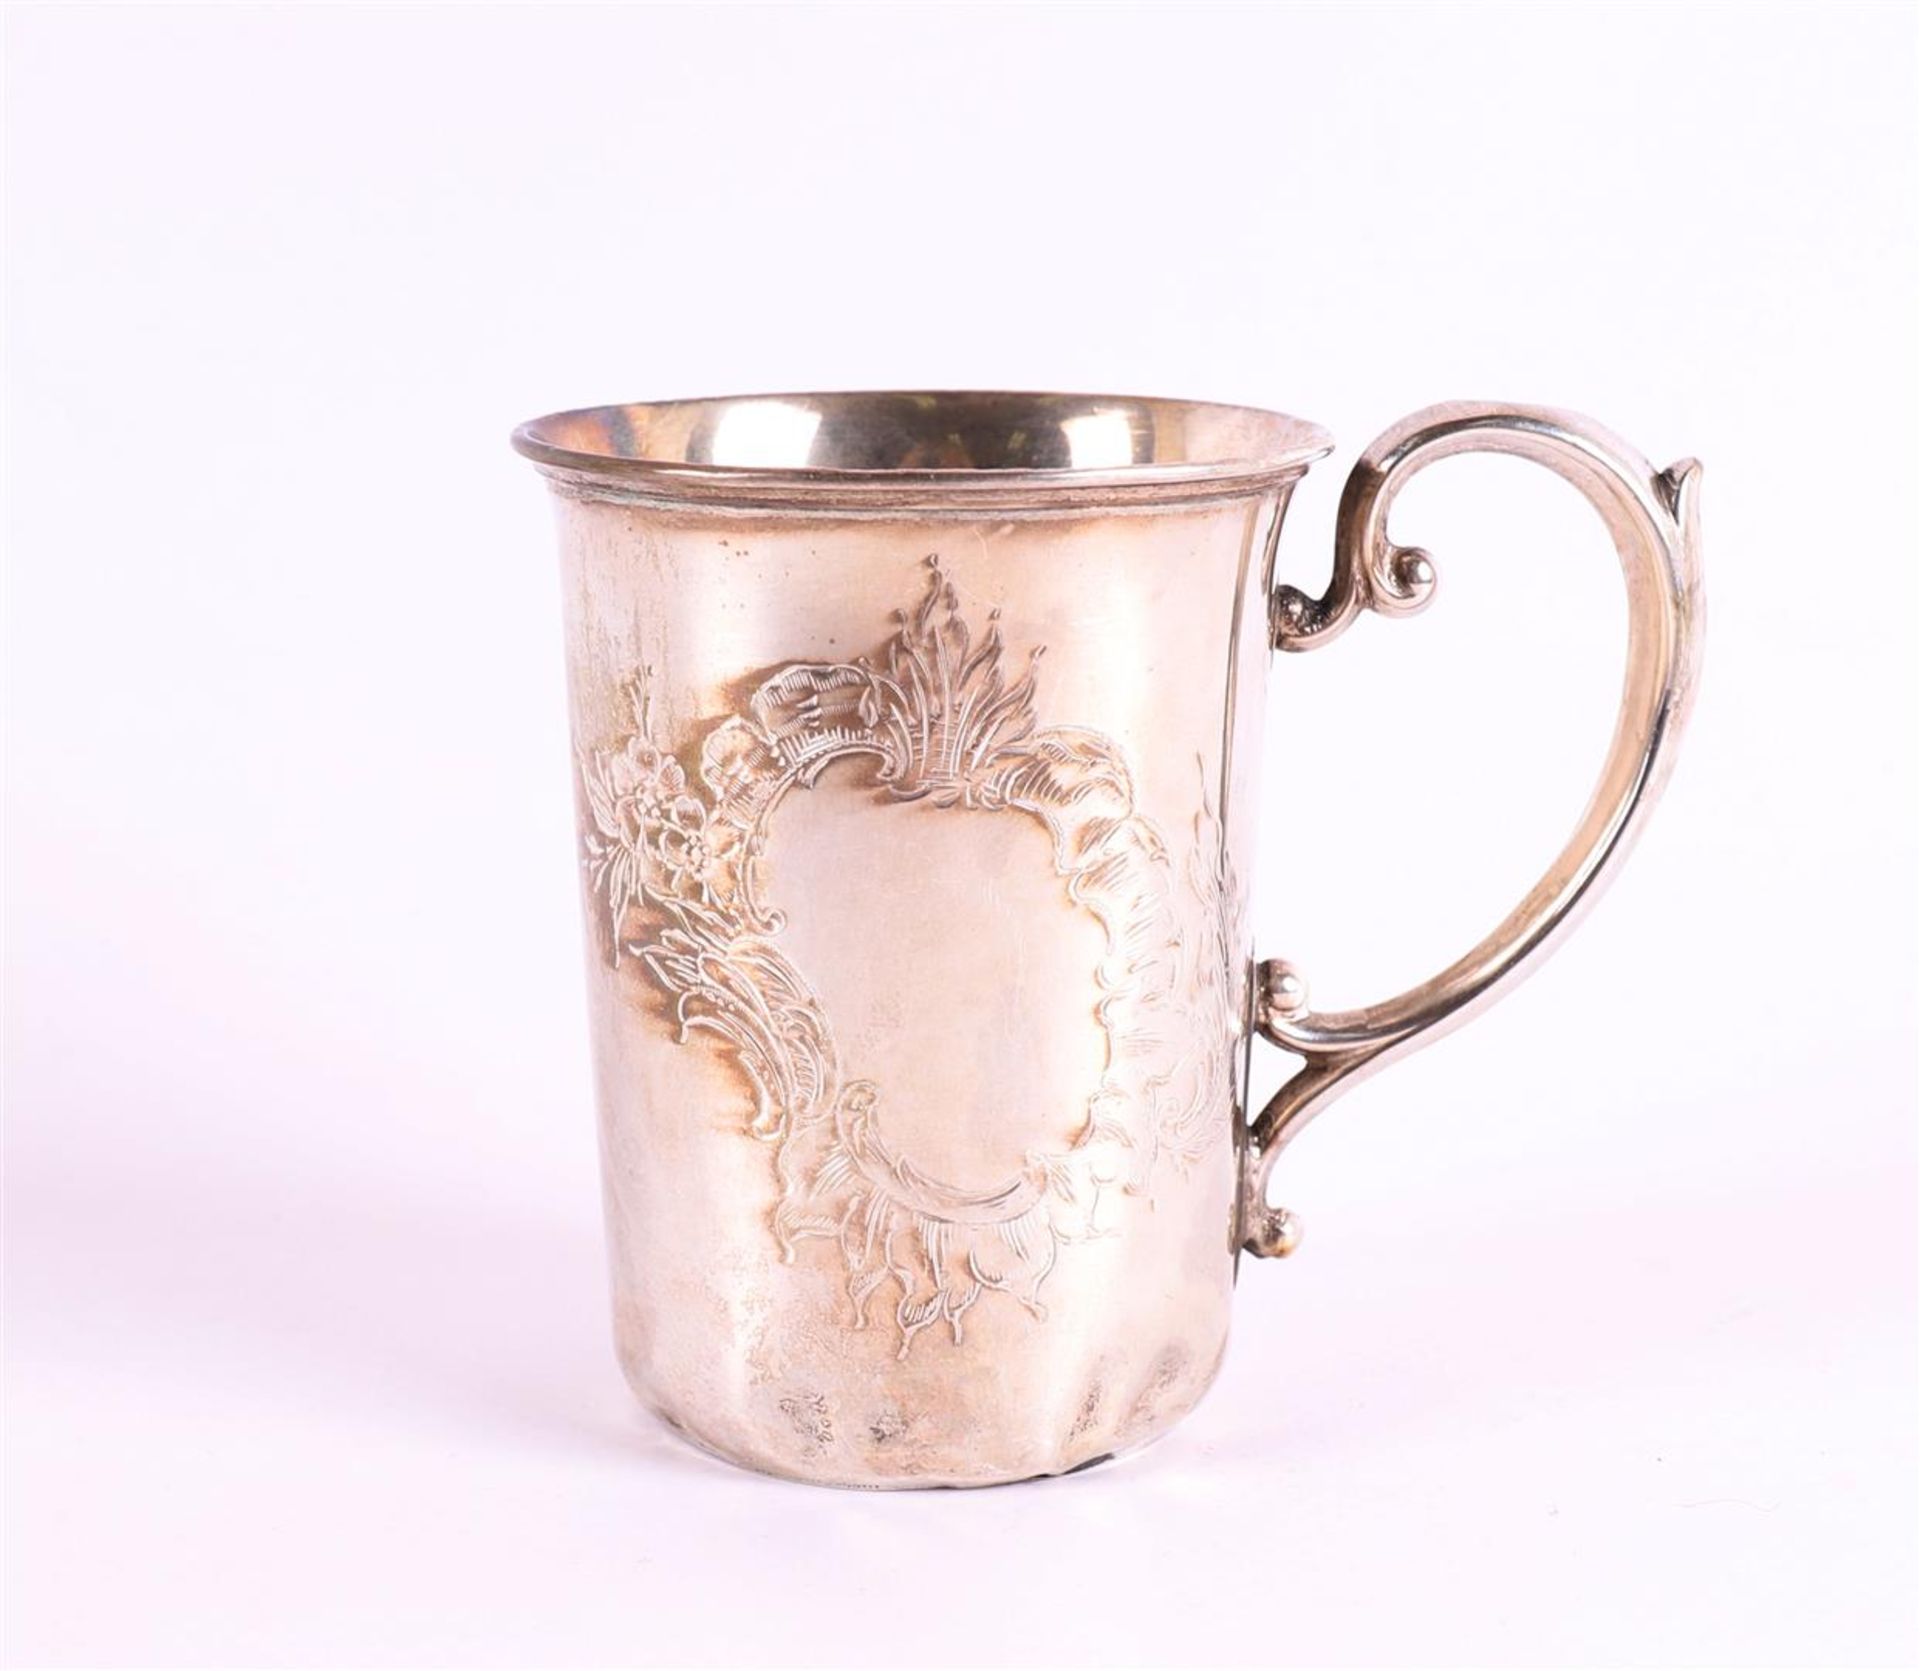 A 3rd grade 800/1000 silver cup on handle, around 1900 (dented), h 7.7 cm, 49 grams.